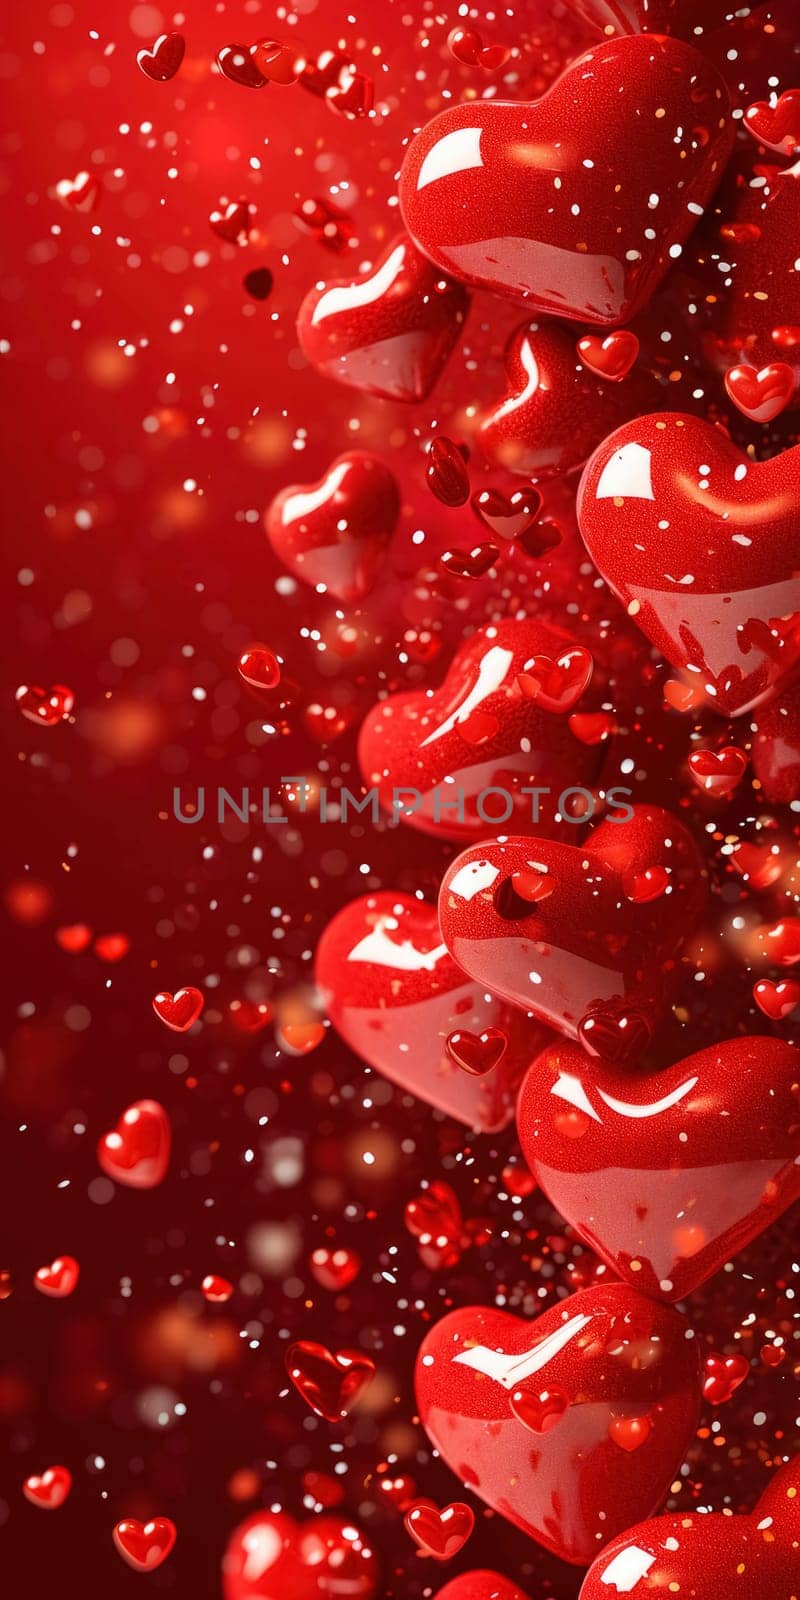 Red background with hearts for Valentine's Day. Vertical banner or greeting card by andreyz